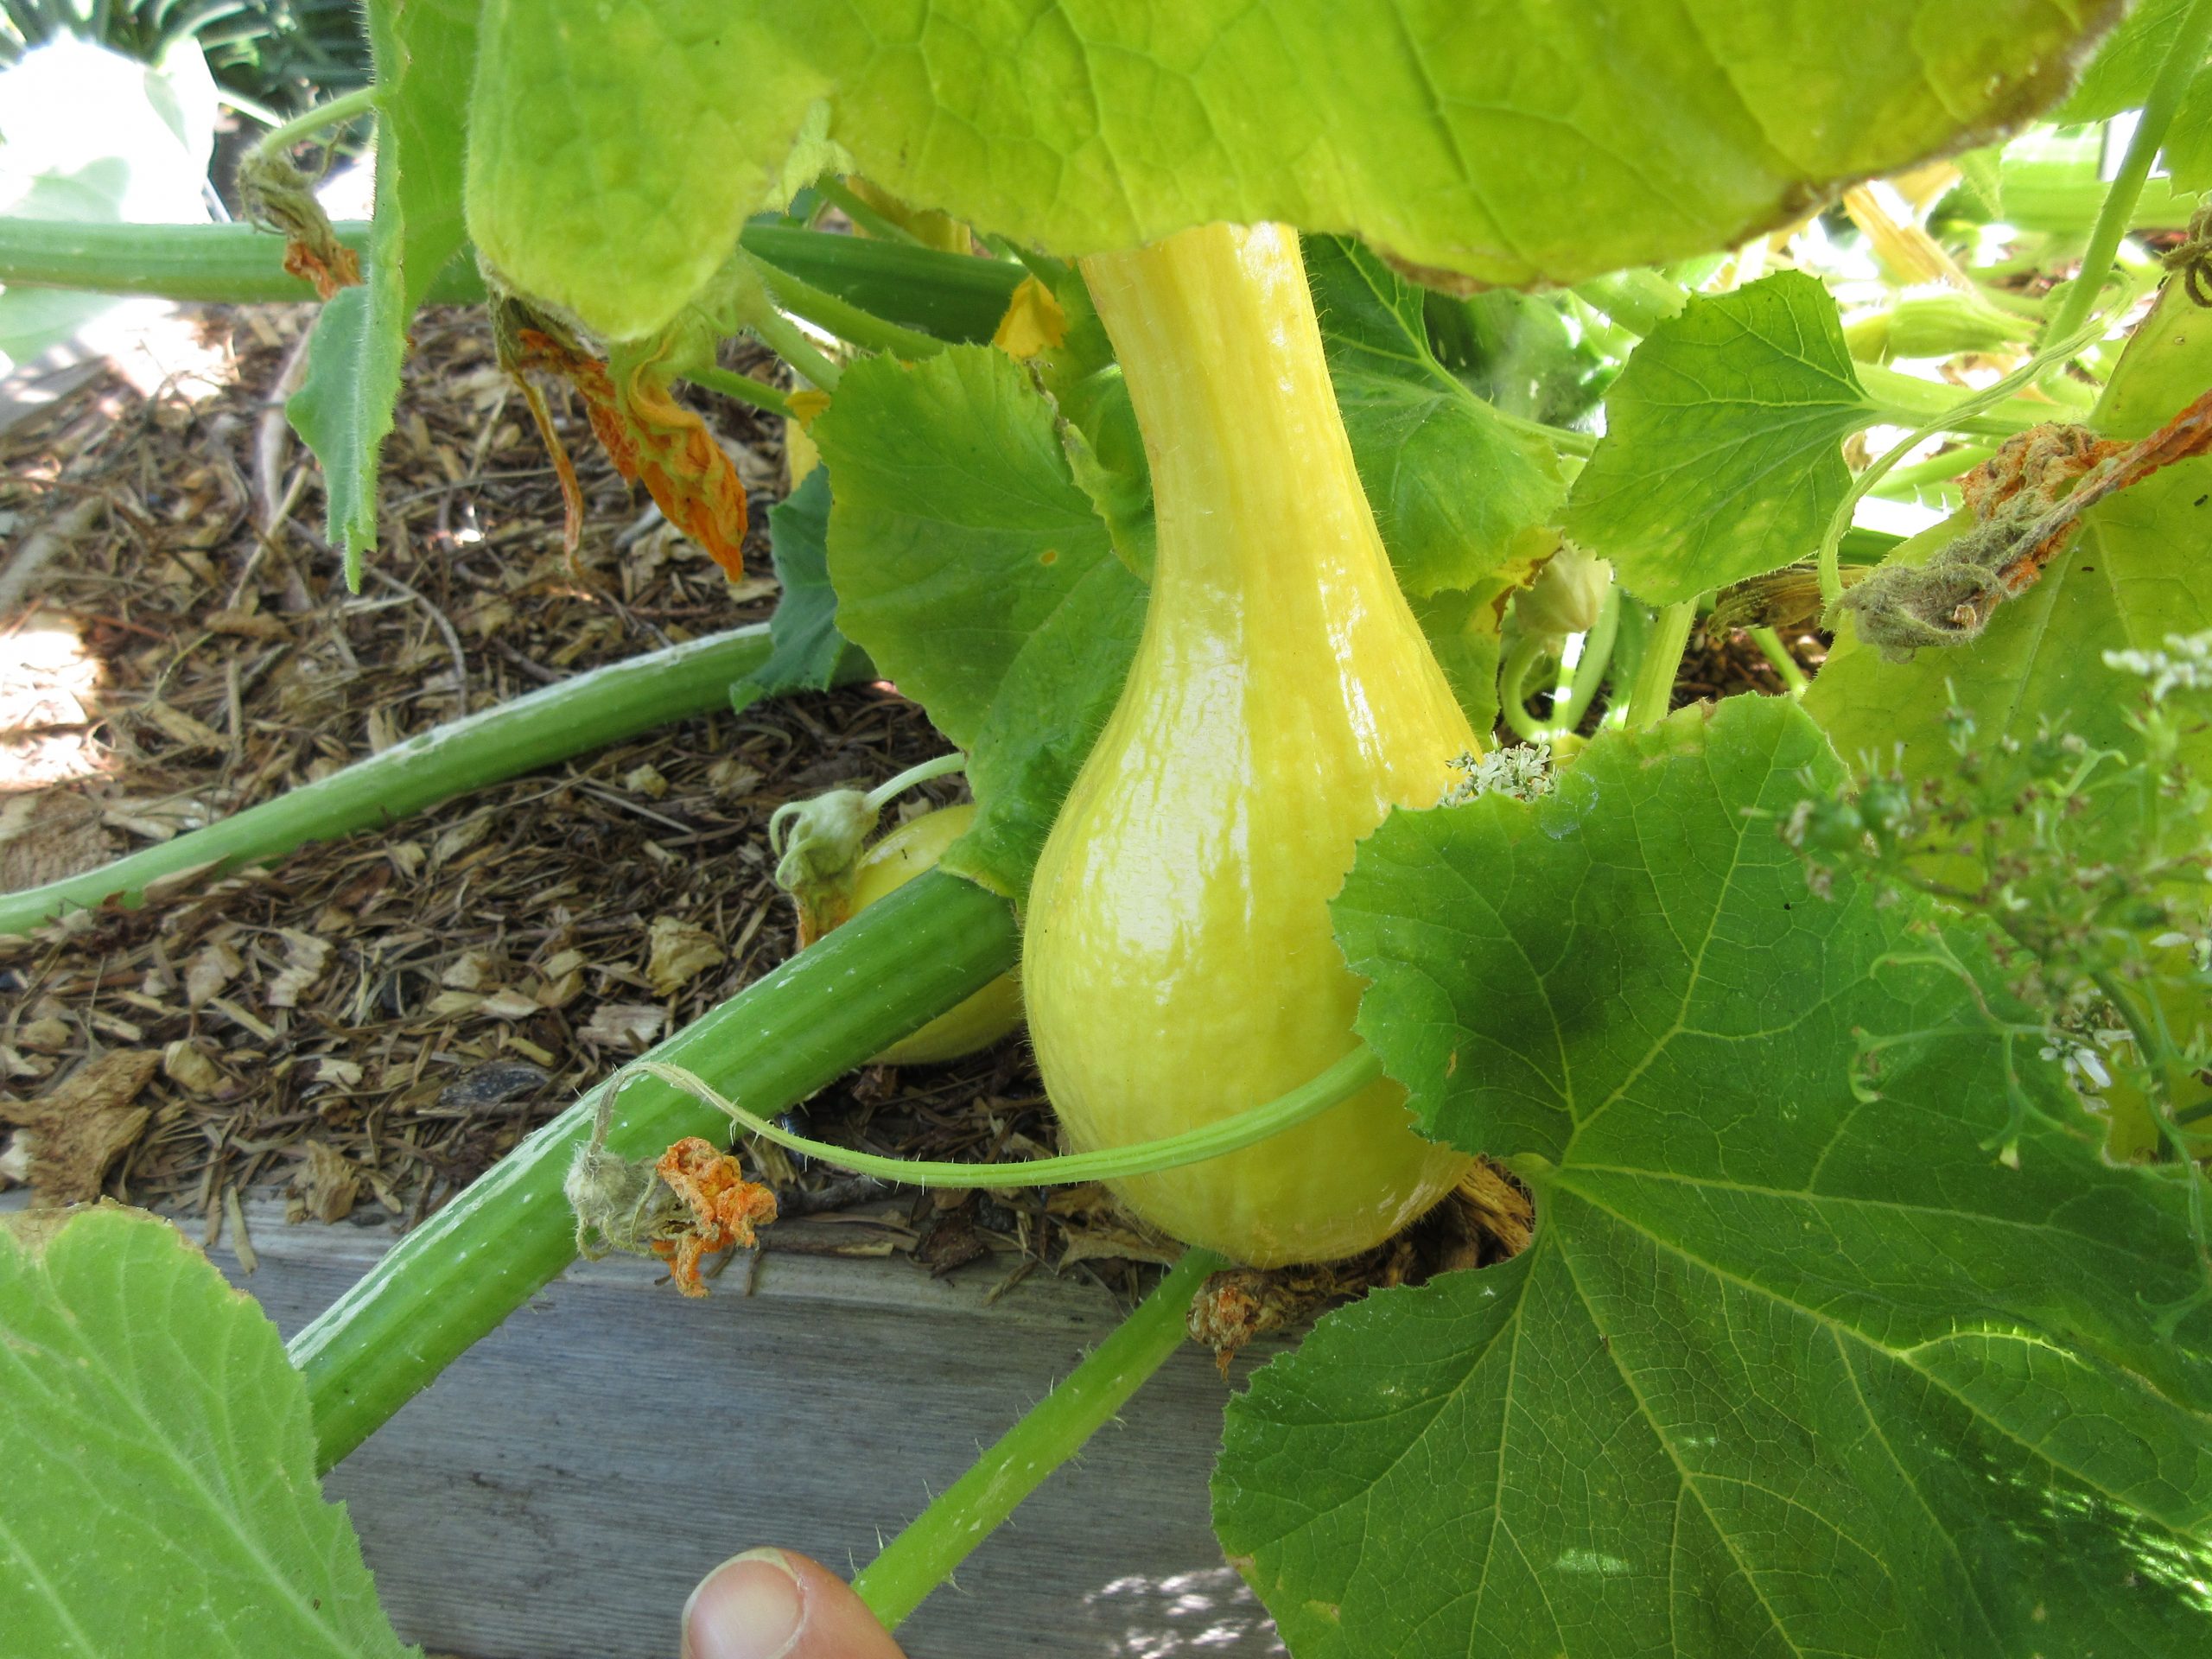 You are currently viewing Wordless Wednesday: Community Garden Bounty